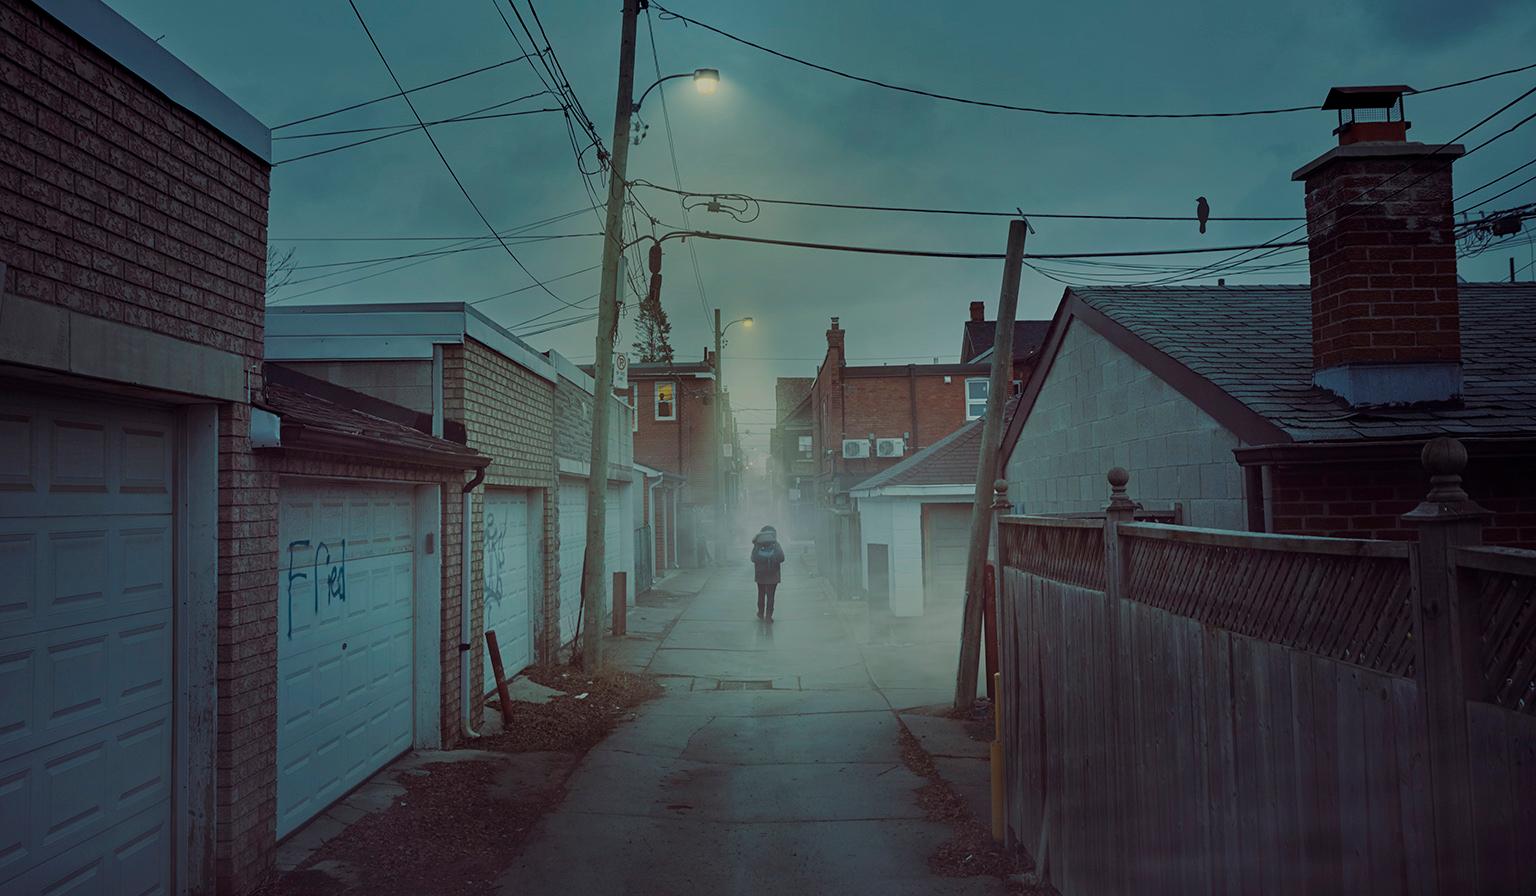 Alley Walker - Black Color Photograph by Tyler Gray